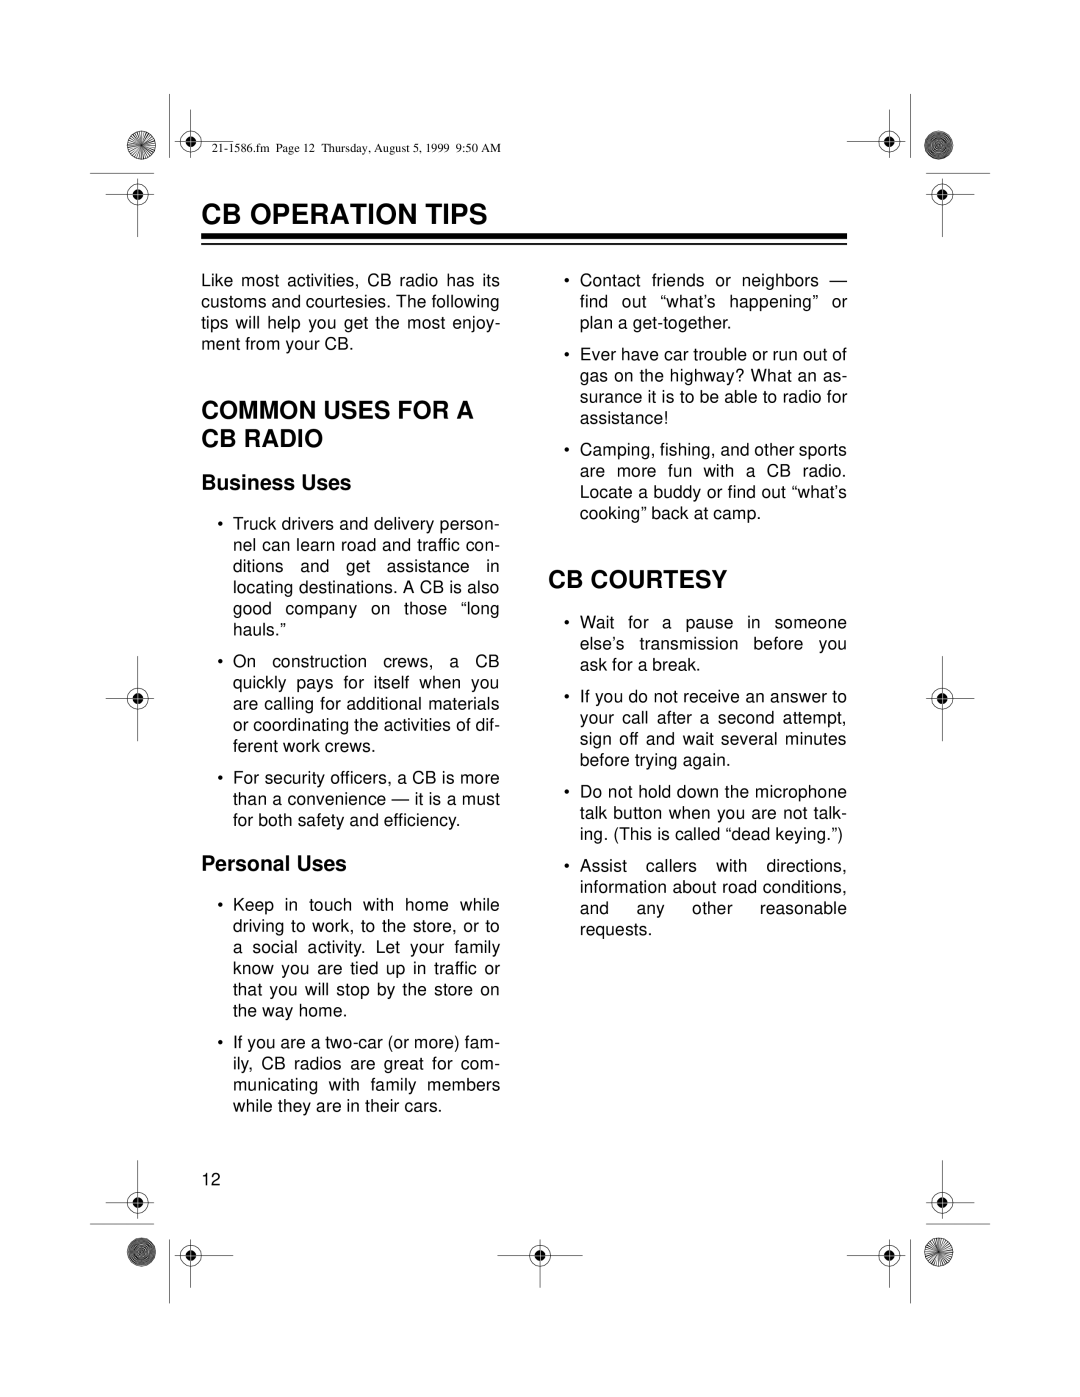 Radio Shack TRC-442 owner manual Cb Operation Tips, Common Uses For A Cb Radio, Cb Courtesy, Business Uses, Personal Uses 